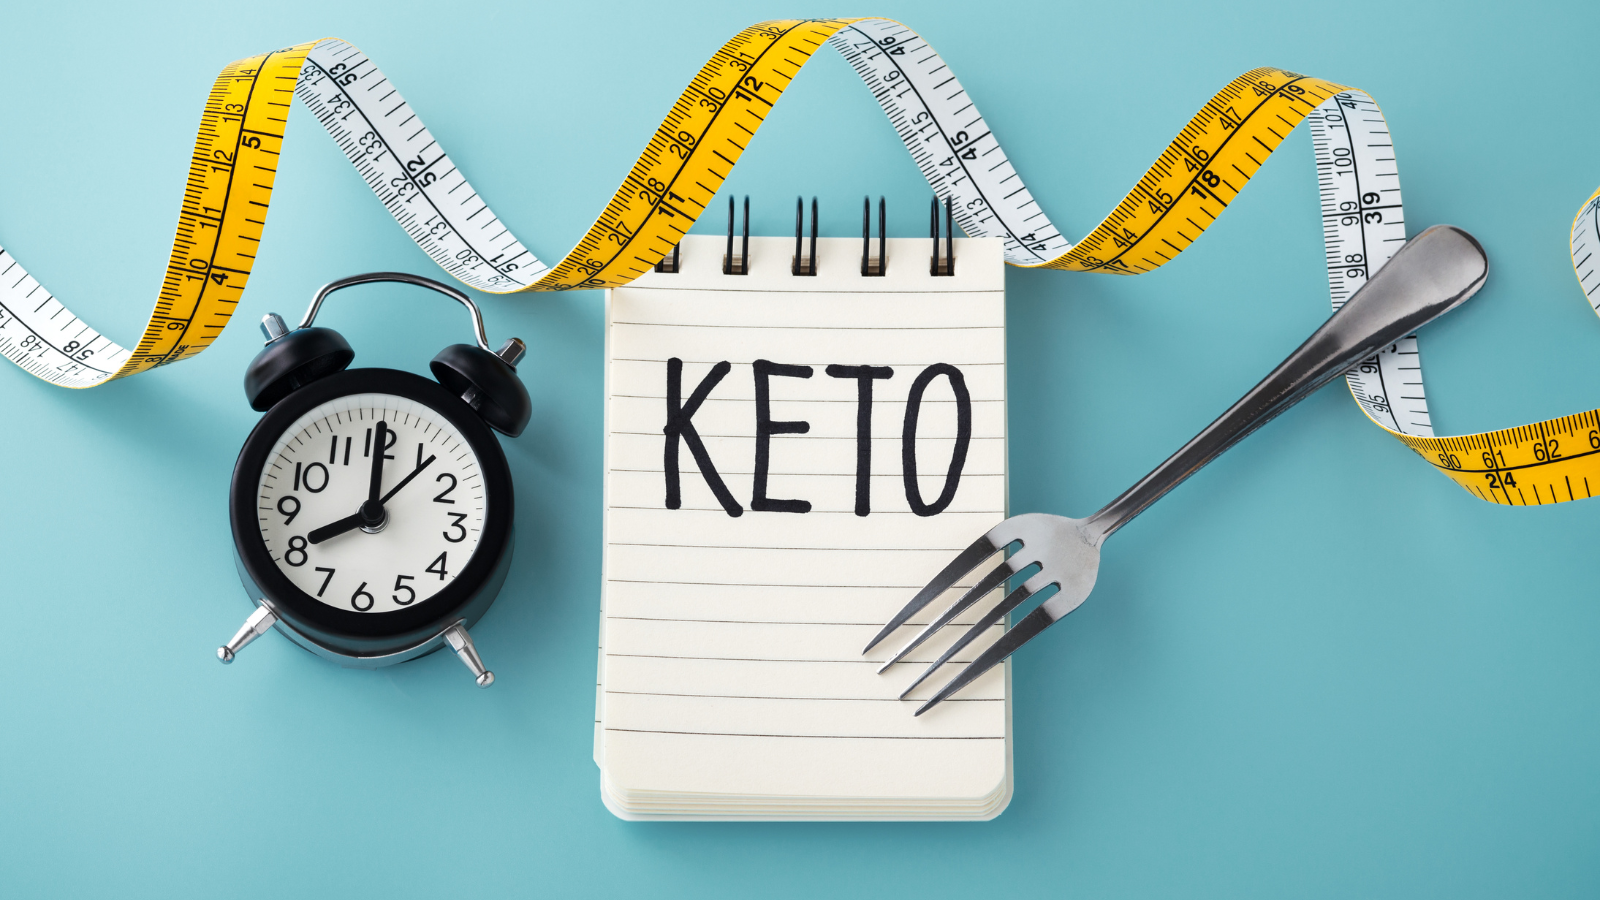 The Ultimate Guide to Effective 23/1 Intermittent Fasting and Keto!